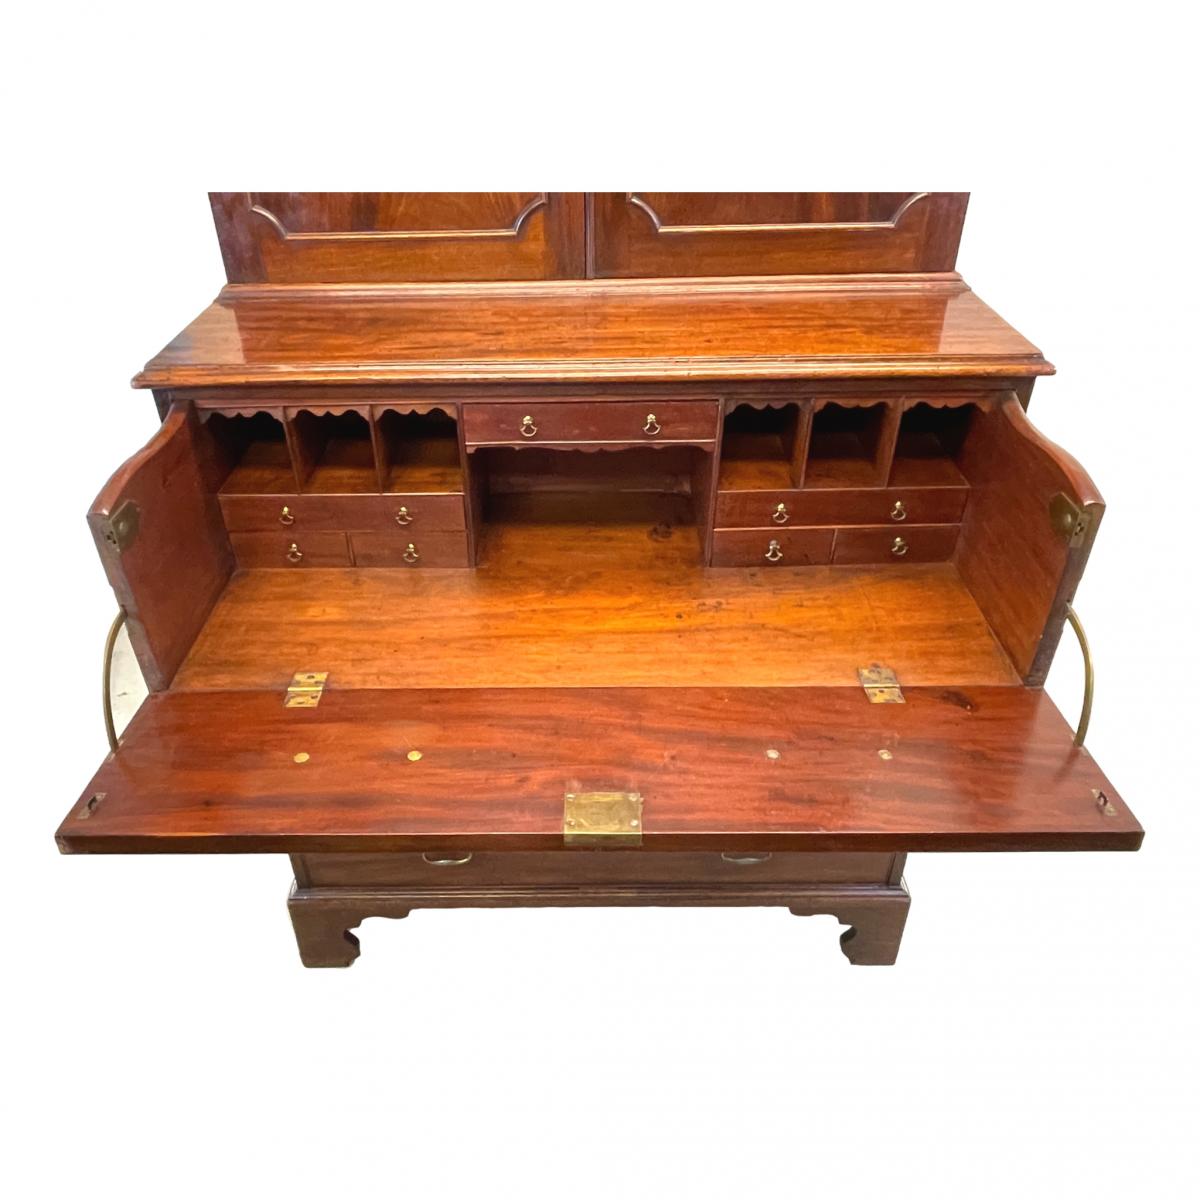 Chippendale Period Mahogany Library Bookcase